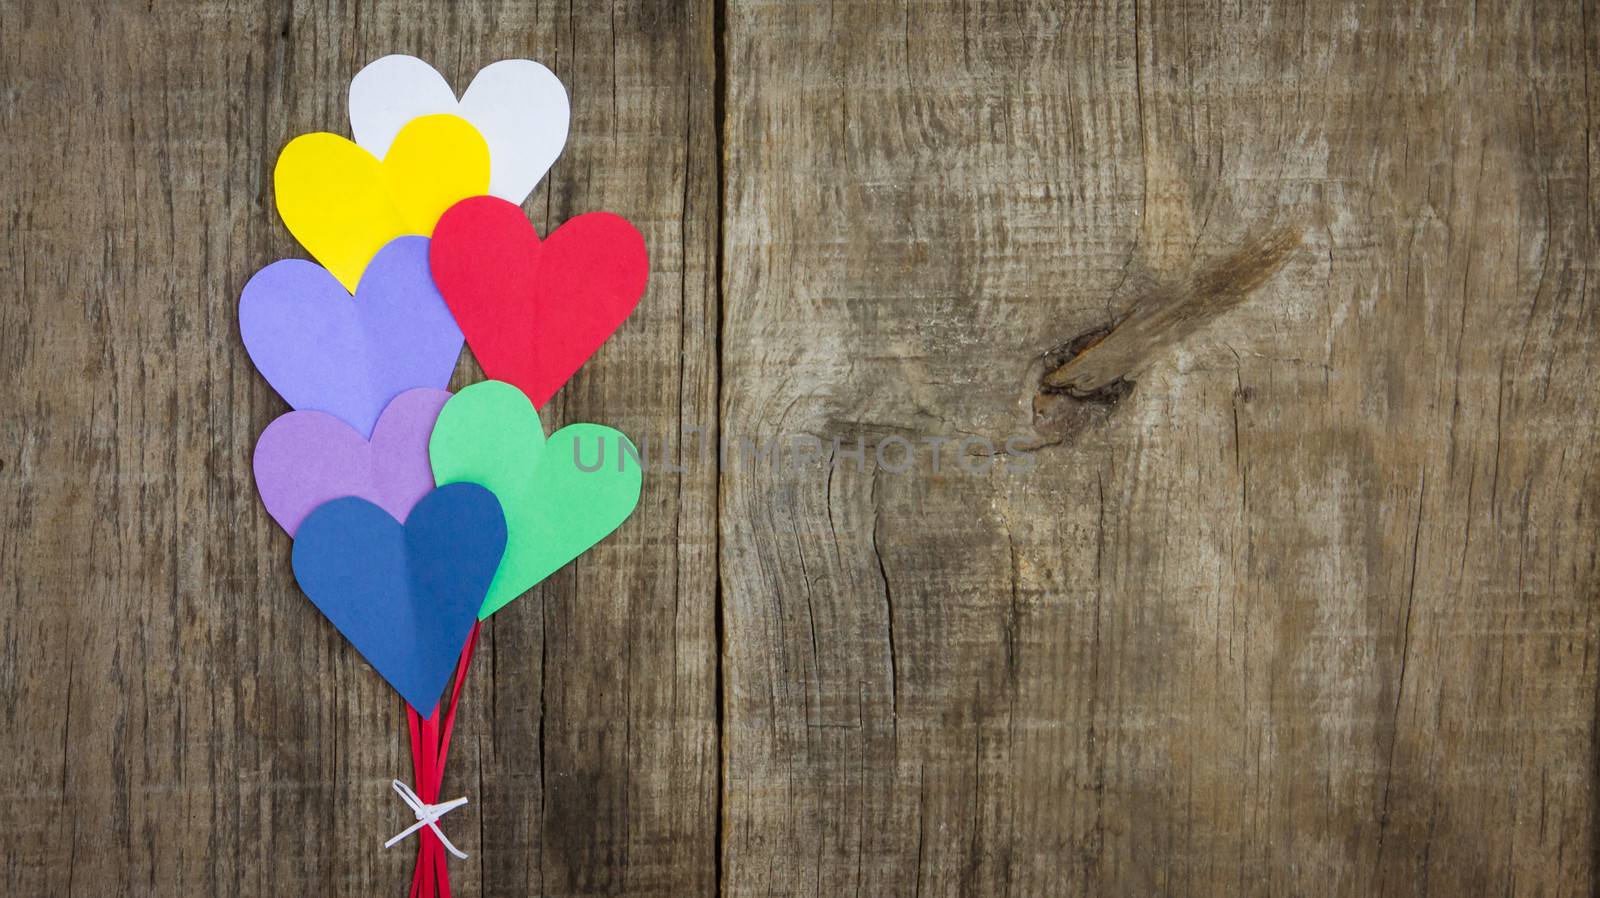 Several colorful paper hearts on wooden textured background